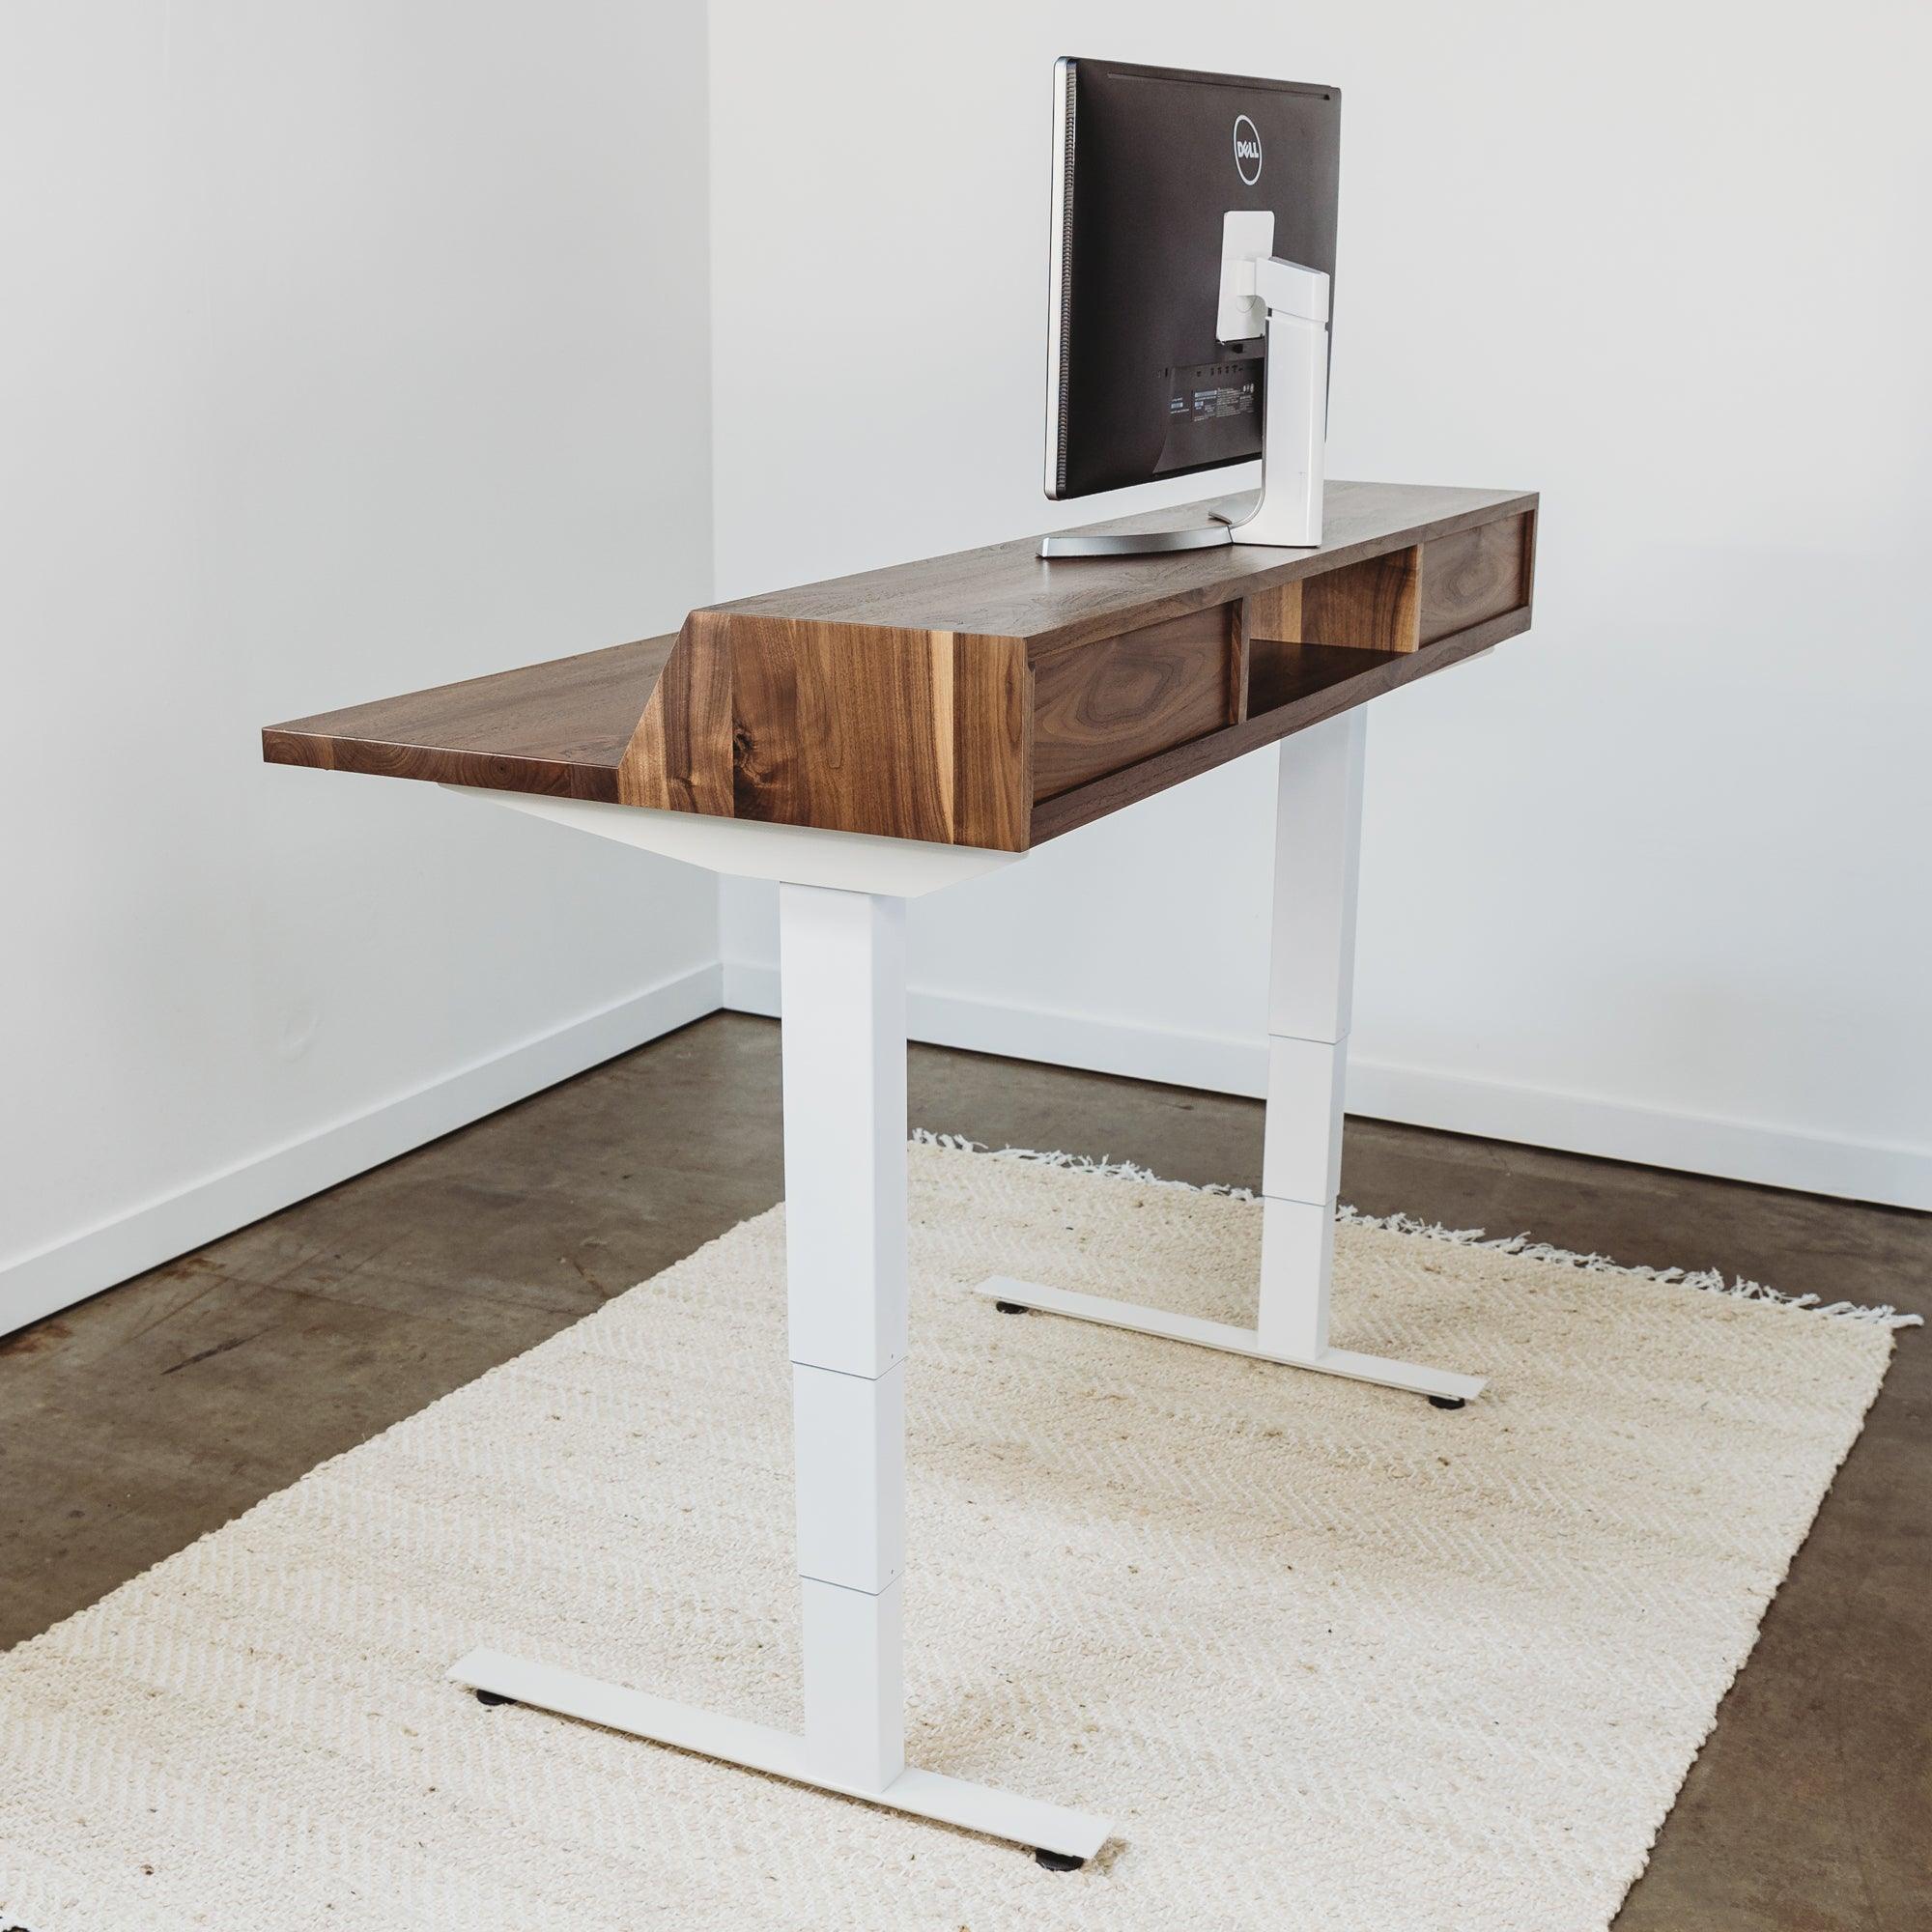 The Albright electric sit stand desk with drawers